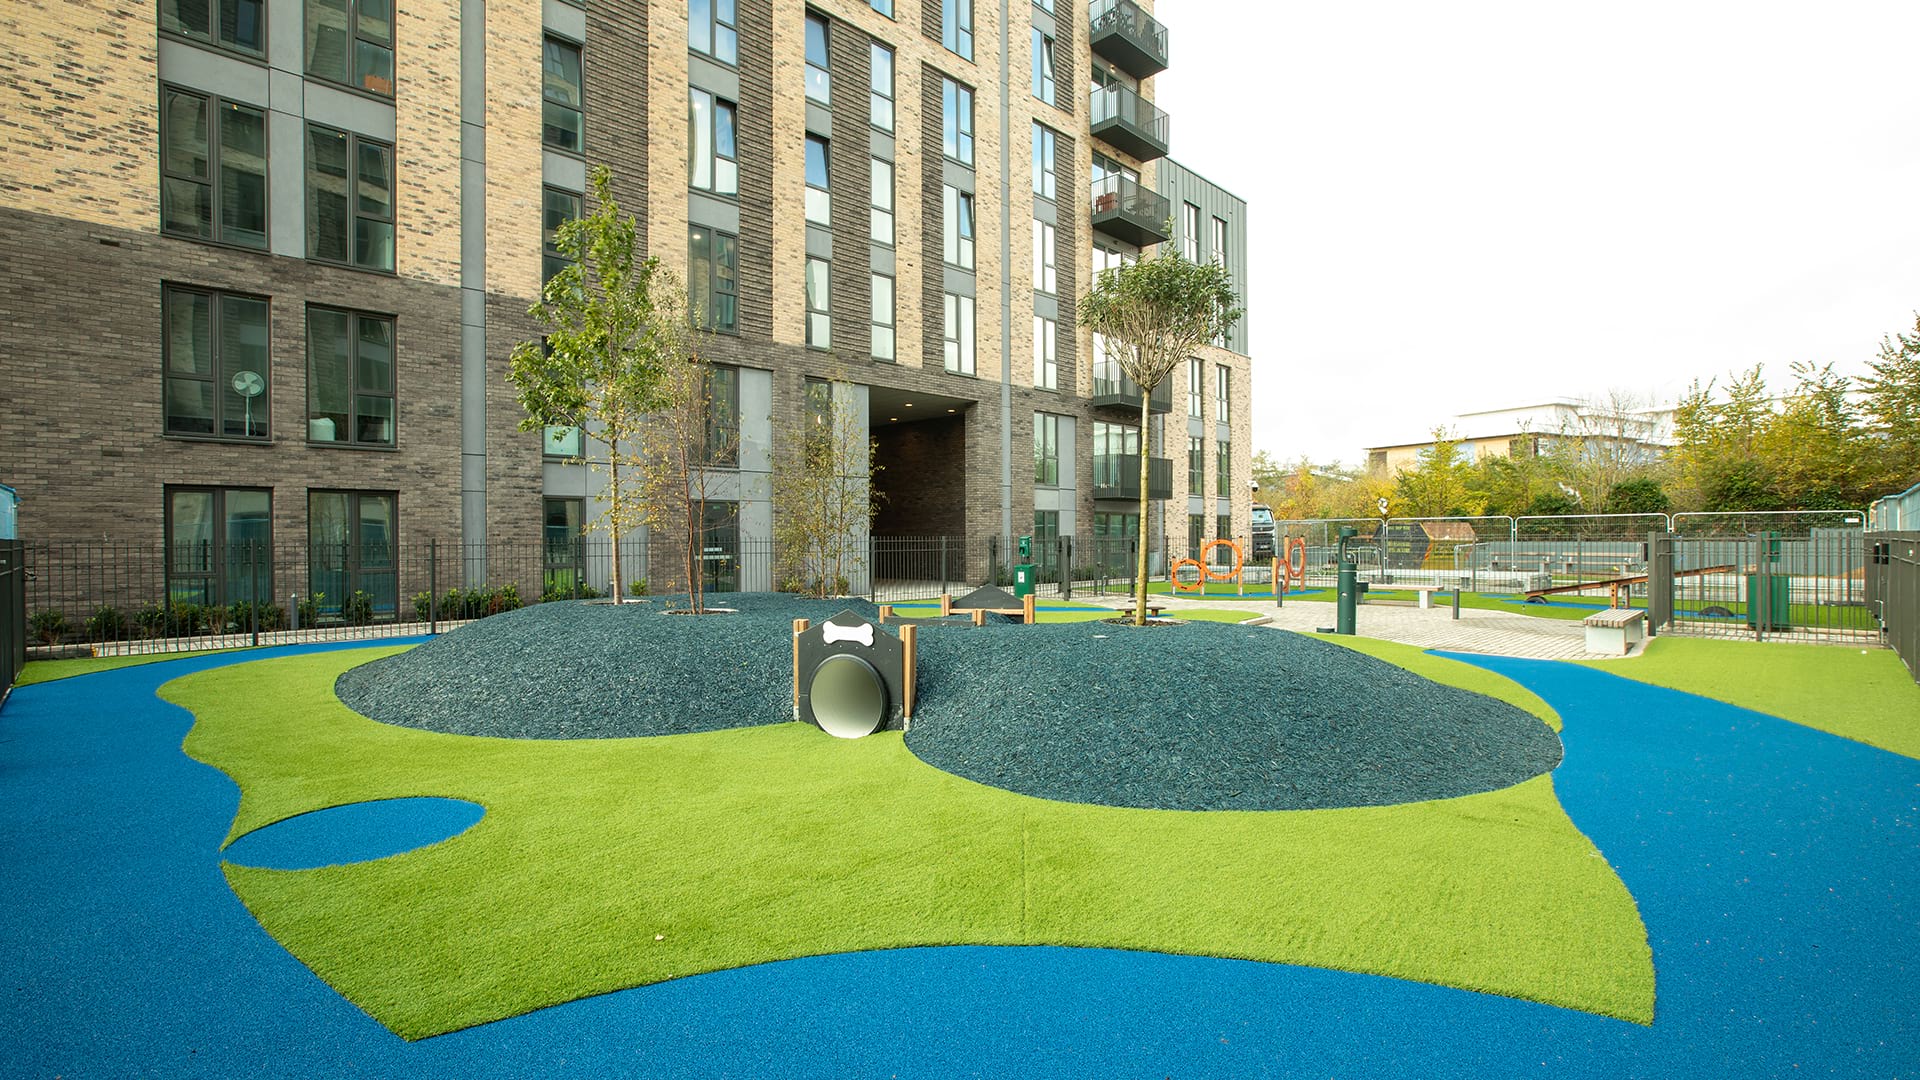 Apartments to Rent by Cortland in Cortland Cassiobury, Watford, WD18, communal dog park